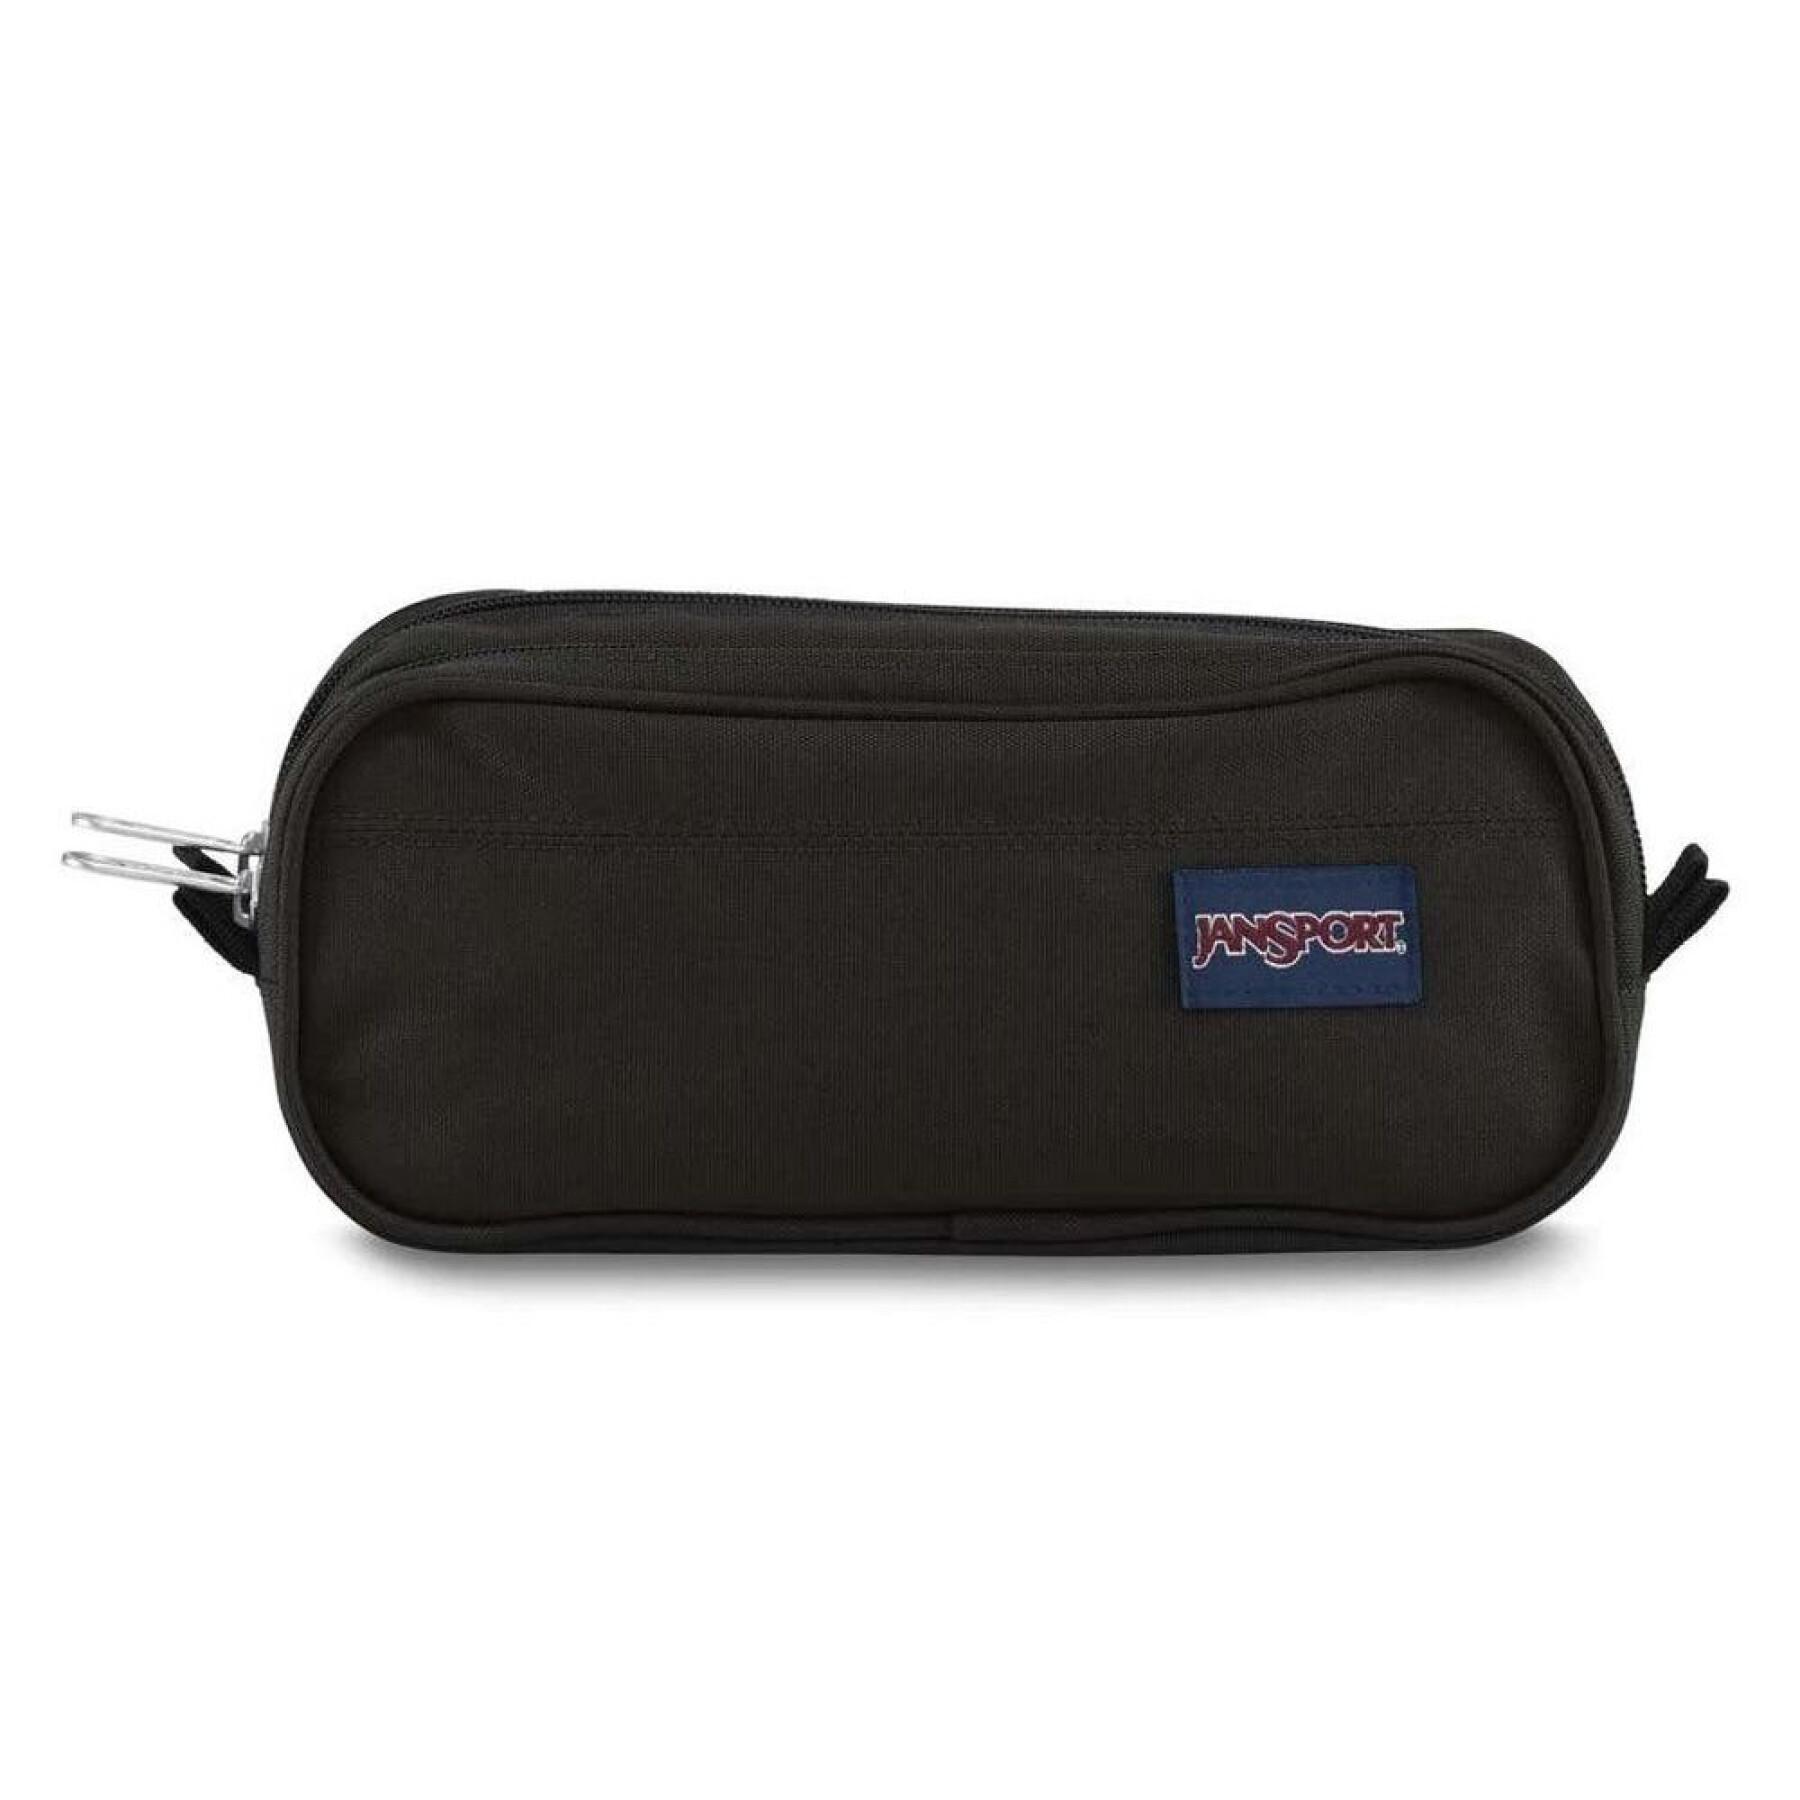 Grote koffer Jansport Pouch